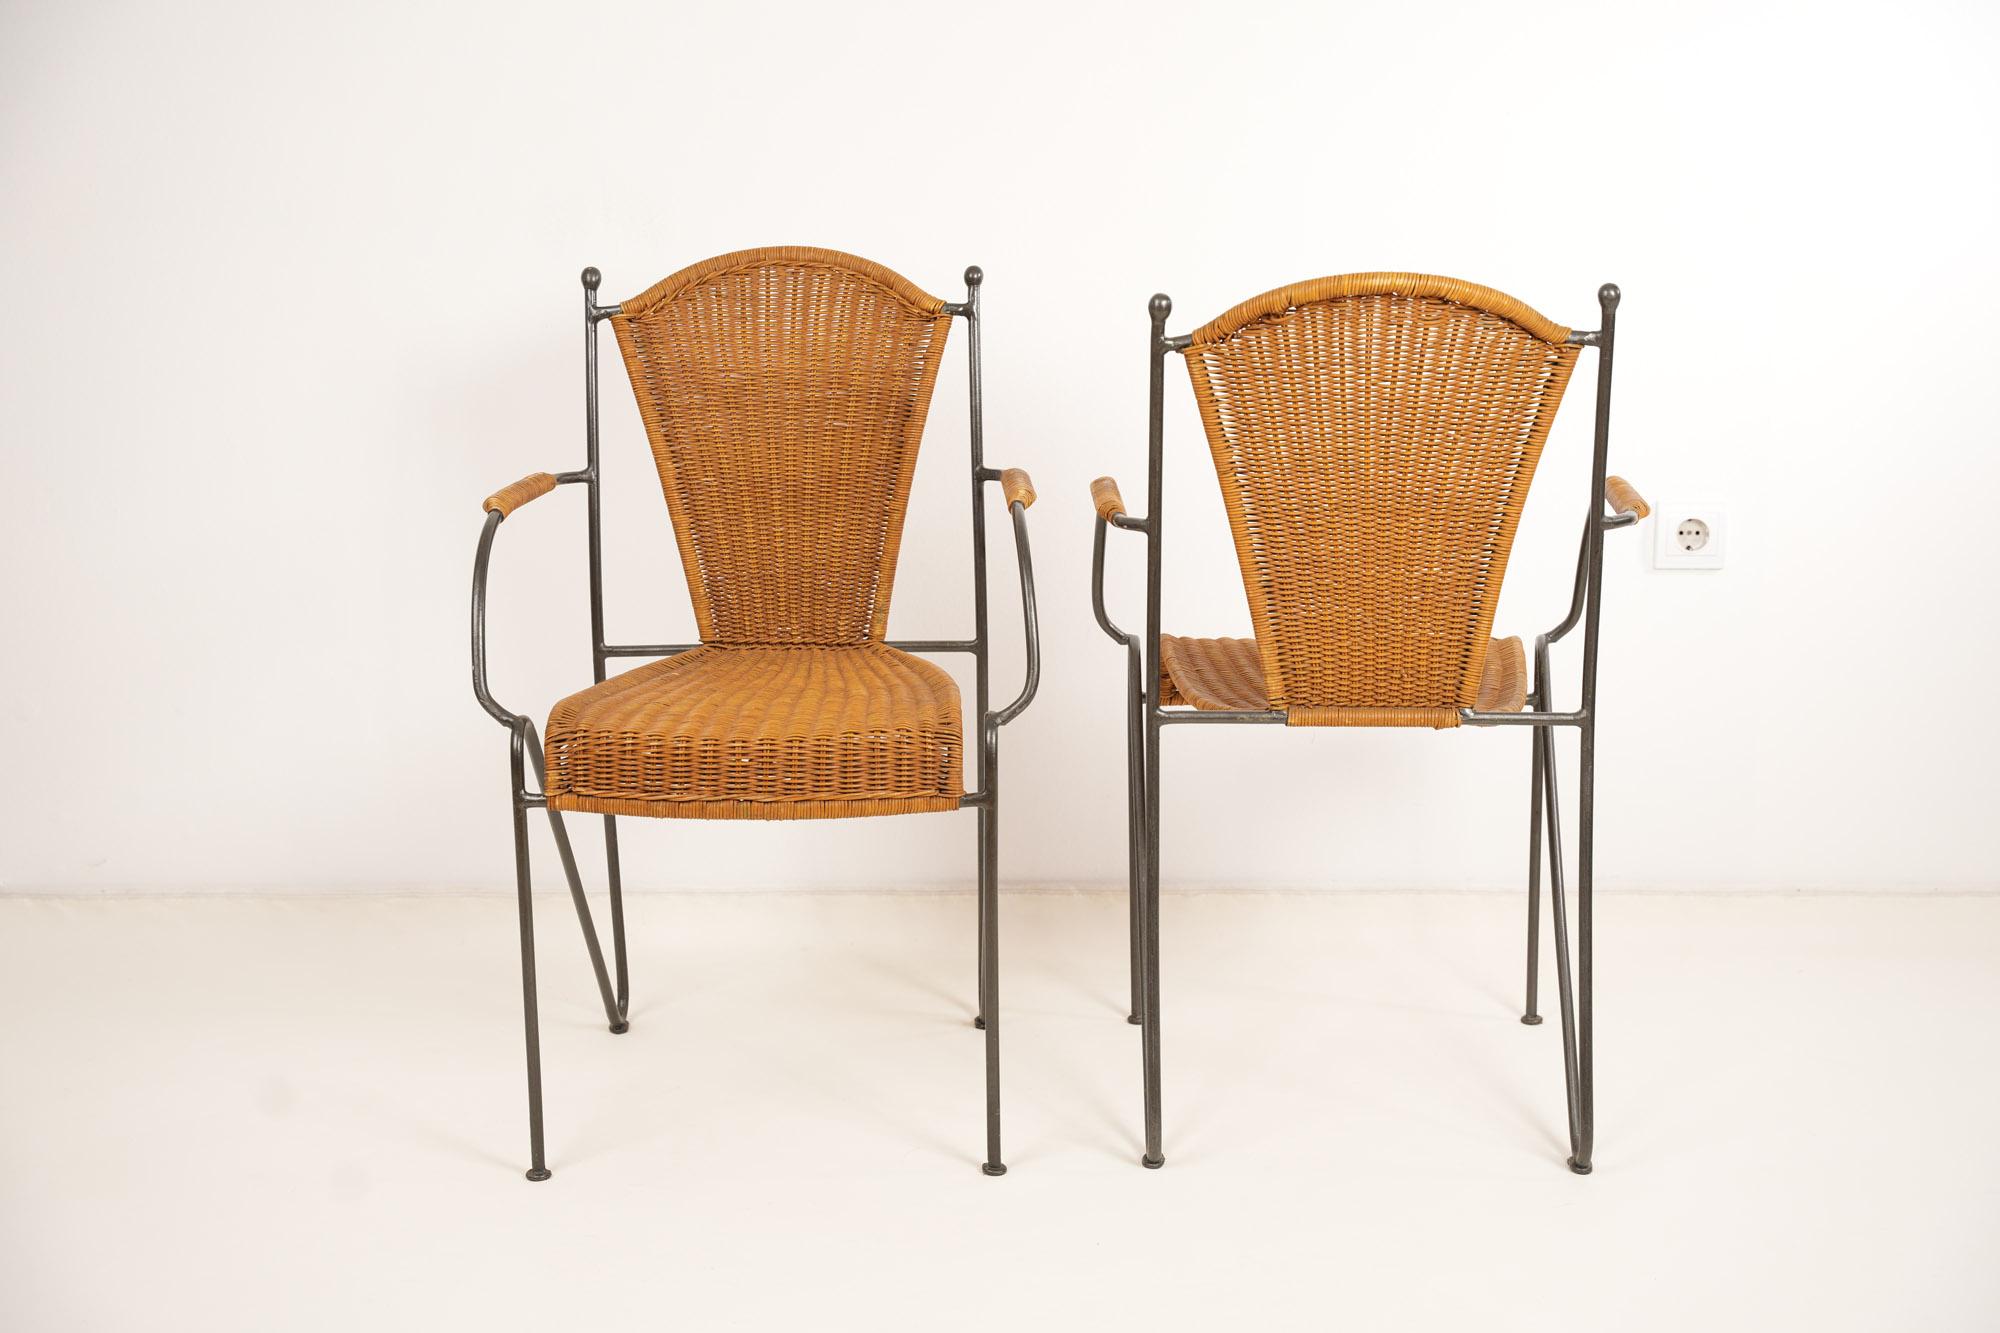 Mid-Century Modern Set of Four Wicker and Iron Chair By Frederic Weinberg 1950s For Sale